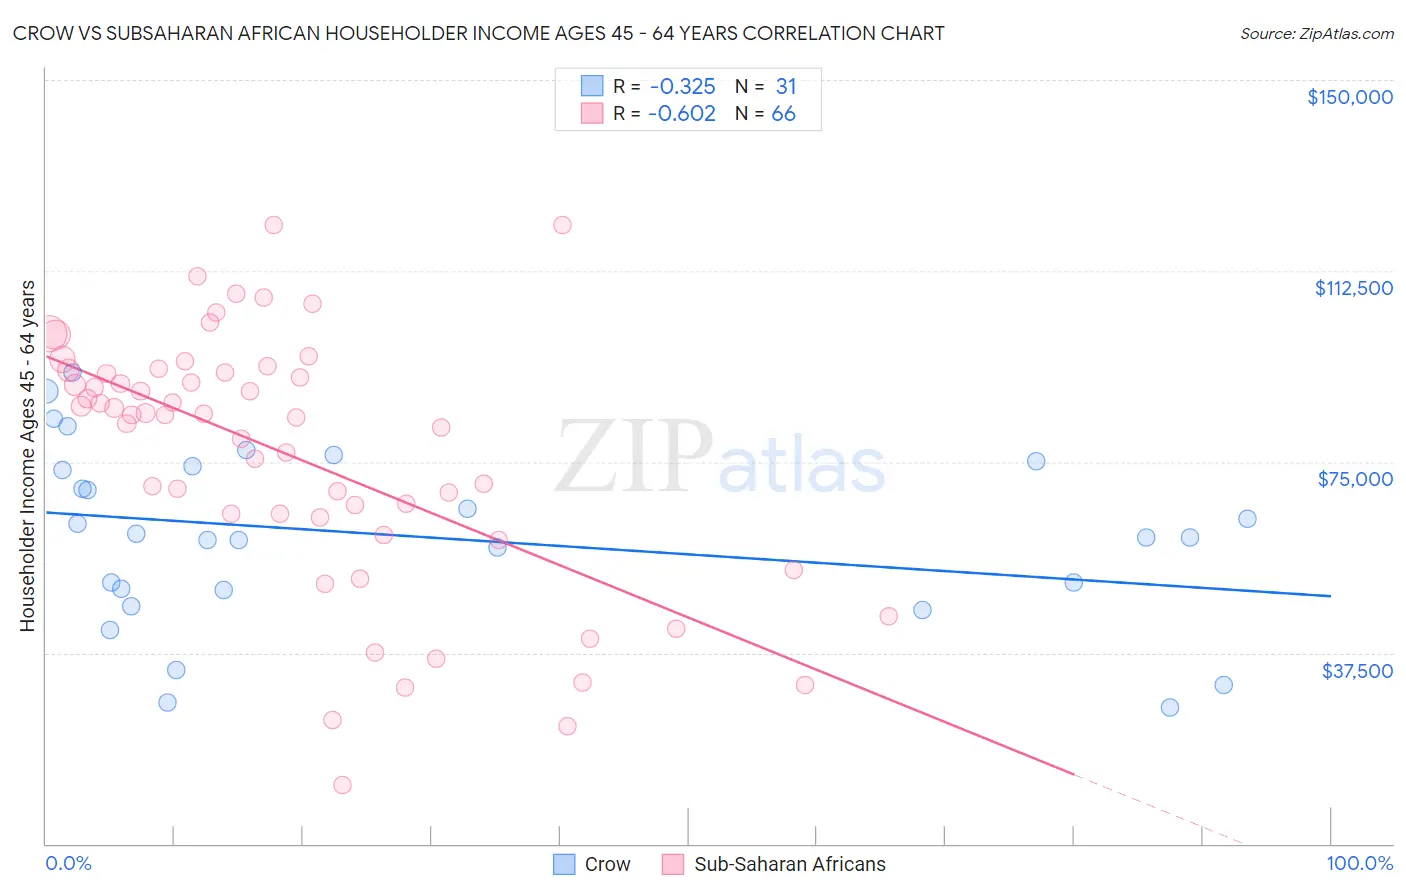 Crow vs Subsaharan African Householder Income Ages 45 - 64 years